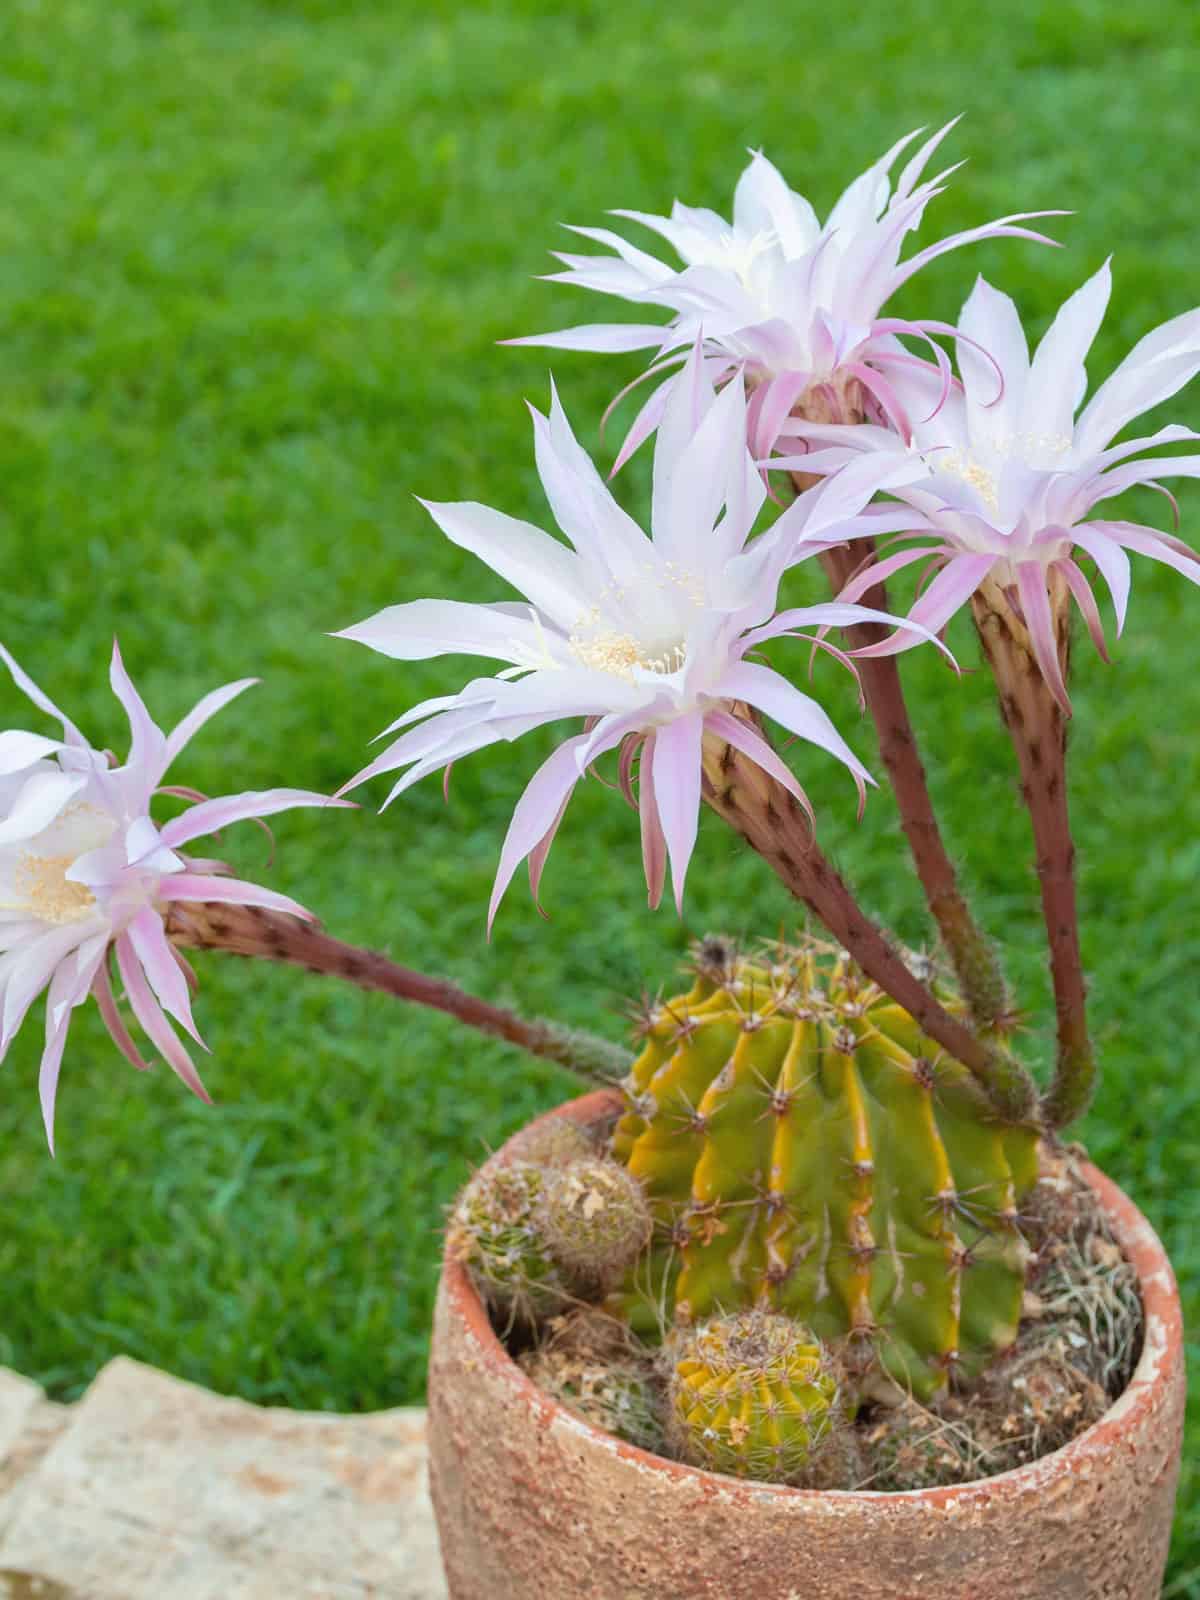 Easter lily cactus flower photographed in full bloom